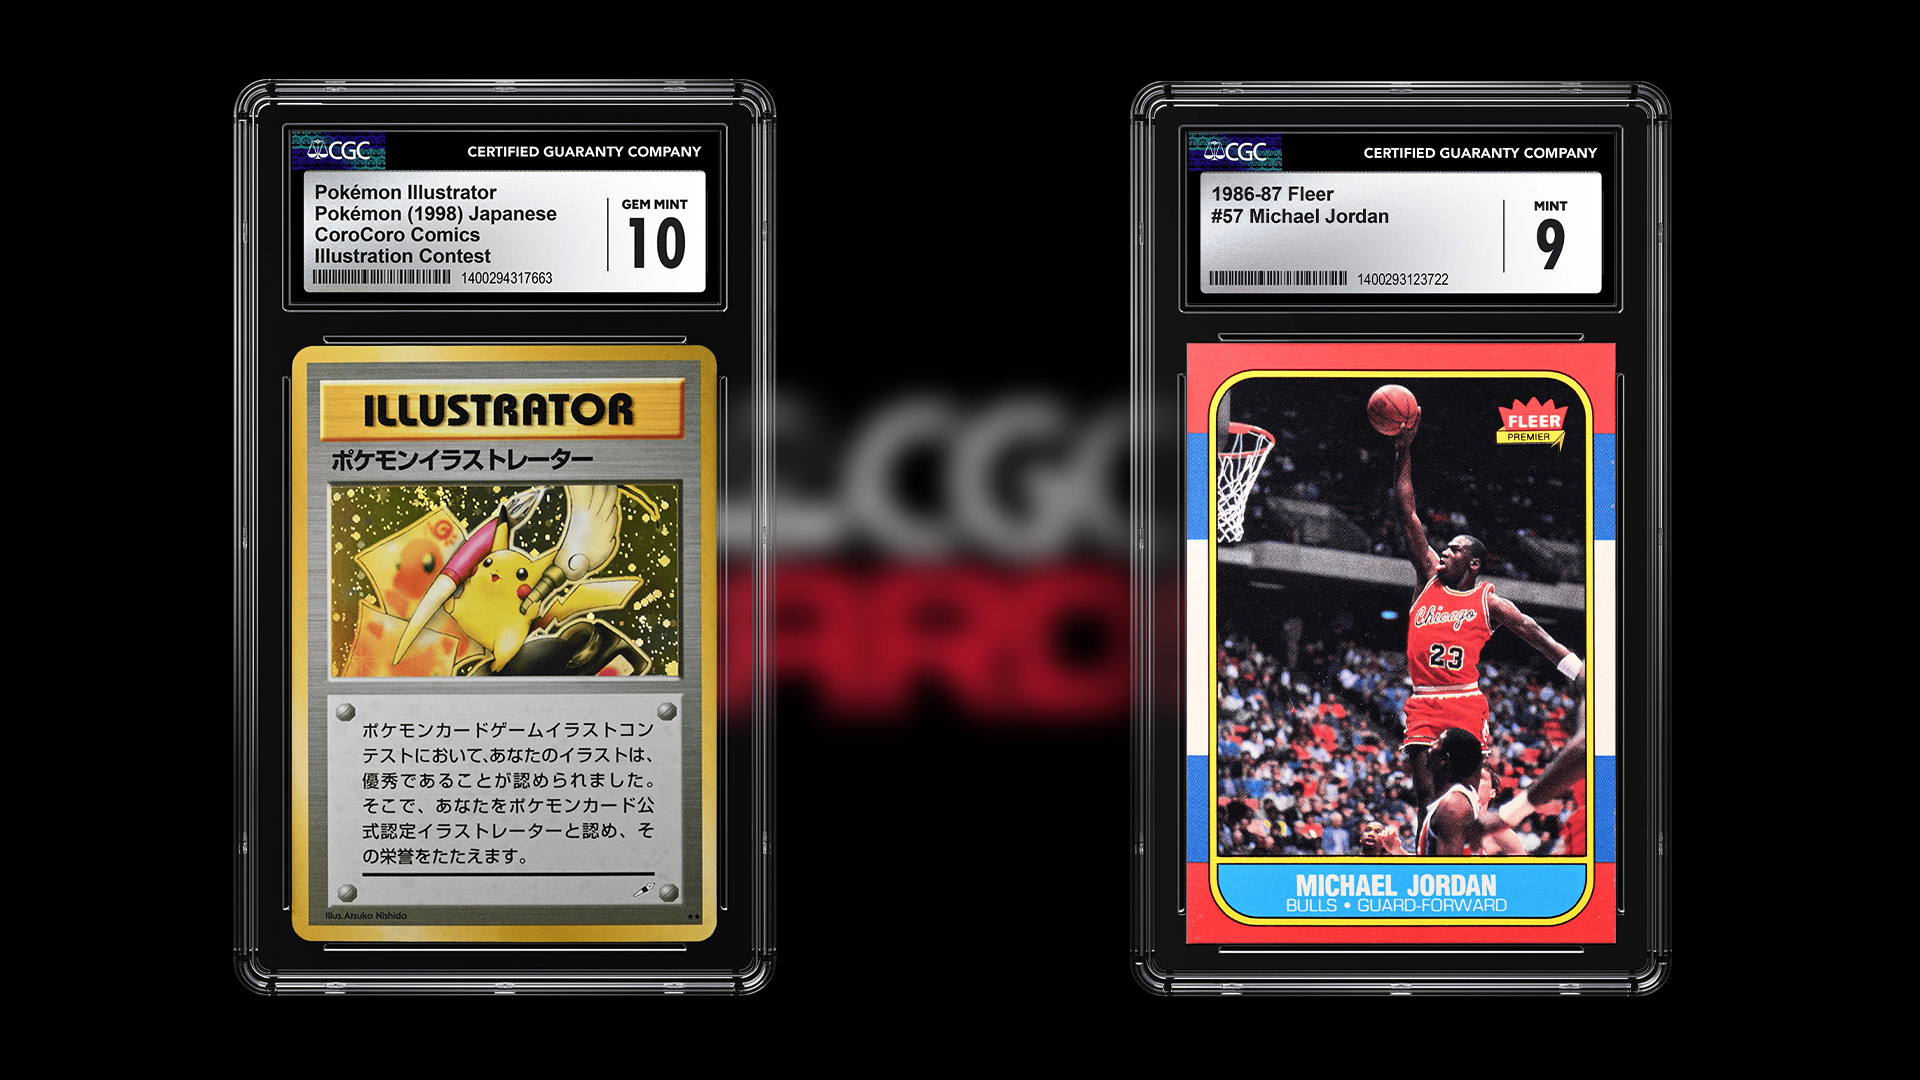 CGC Trading Cards and CSG Will Combine to Become the World's